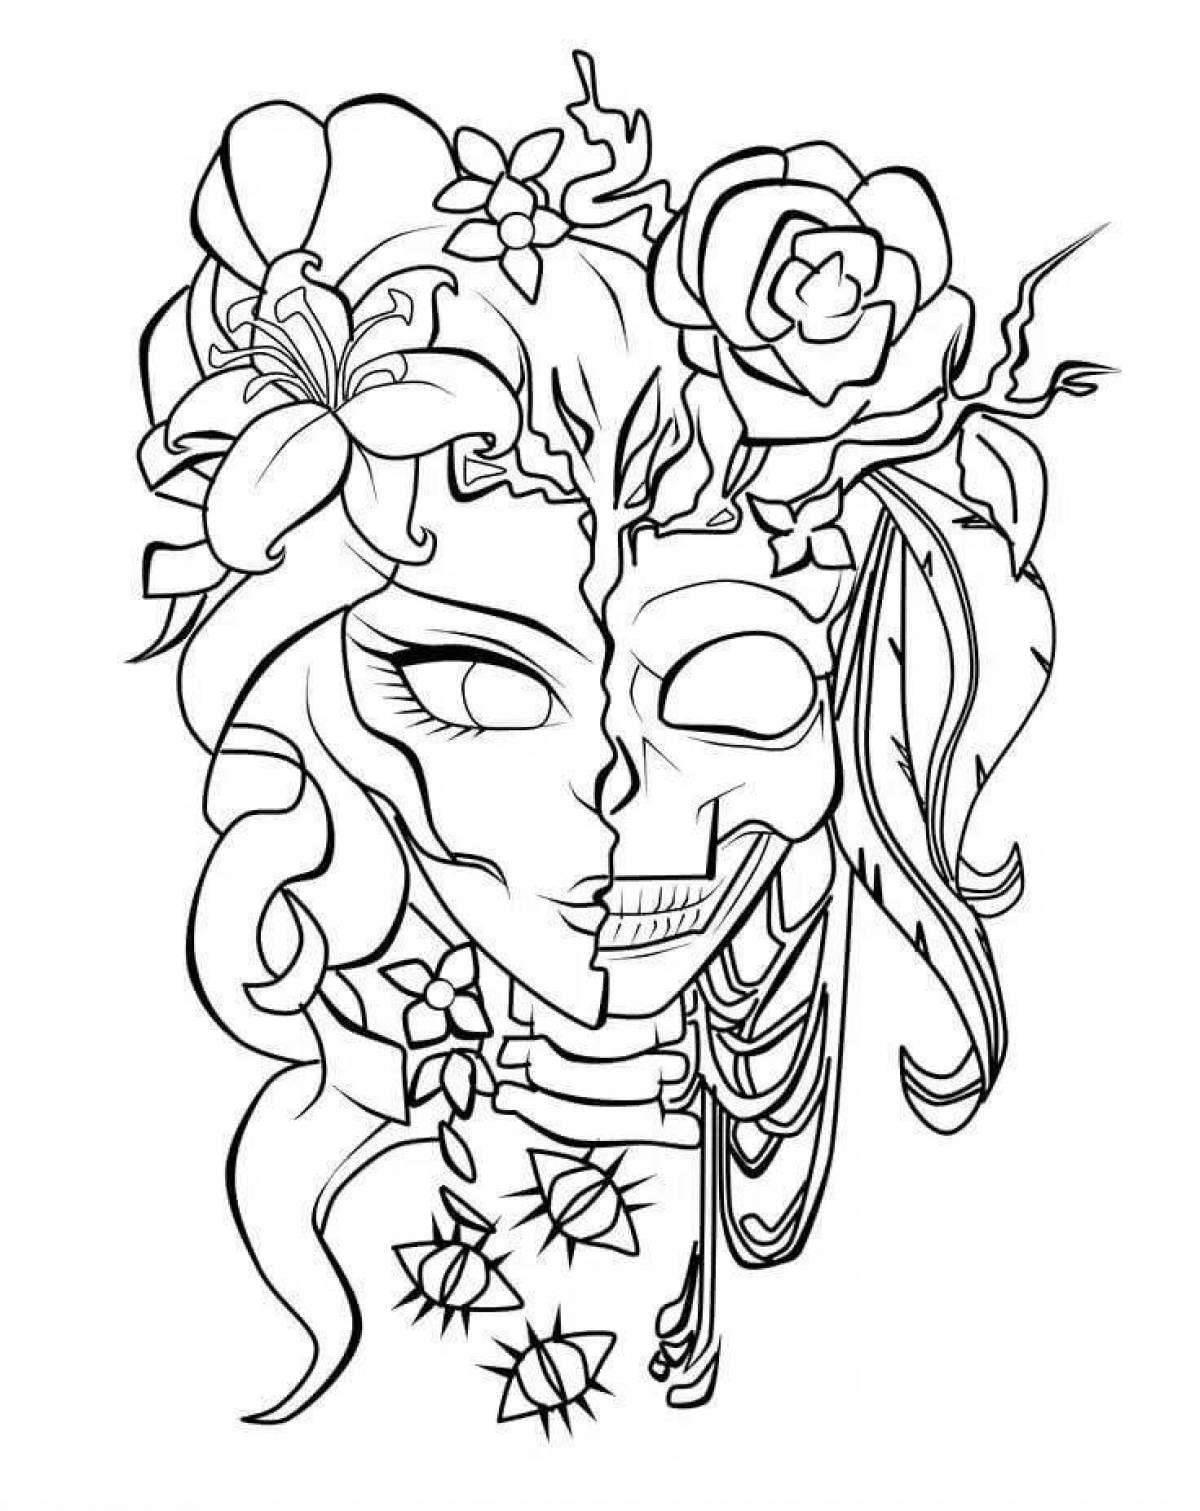 Coloring page is scary but beautiful: disgustingly beautiful